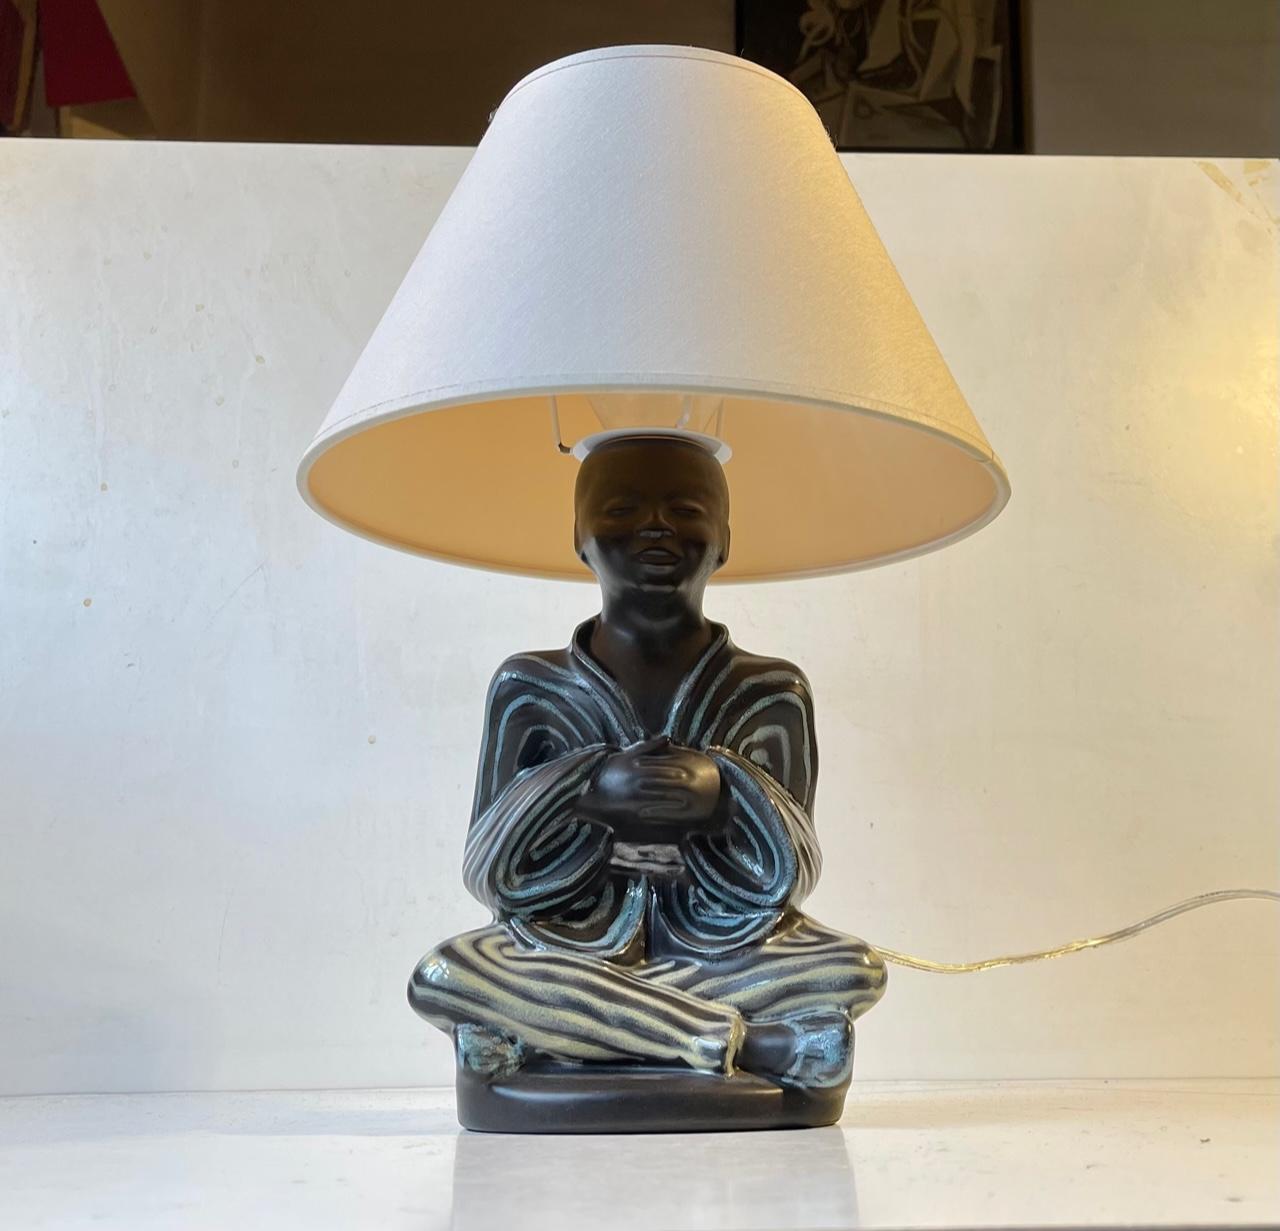 Vintage Black Buddha Table Lamp with Pastel Glazes by Søholm, Danish 1960s For Sale 4